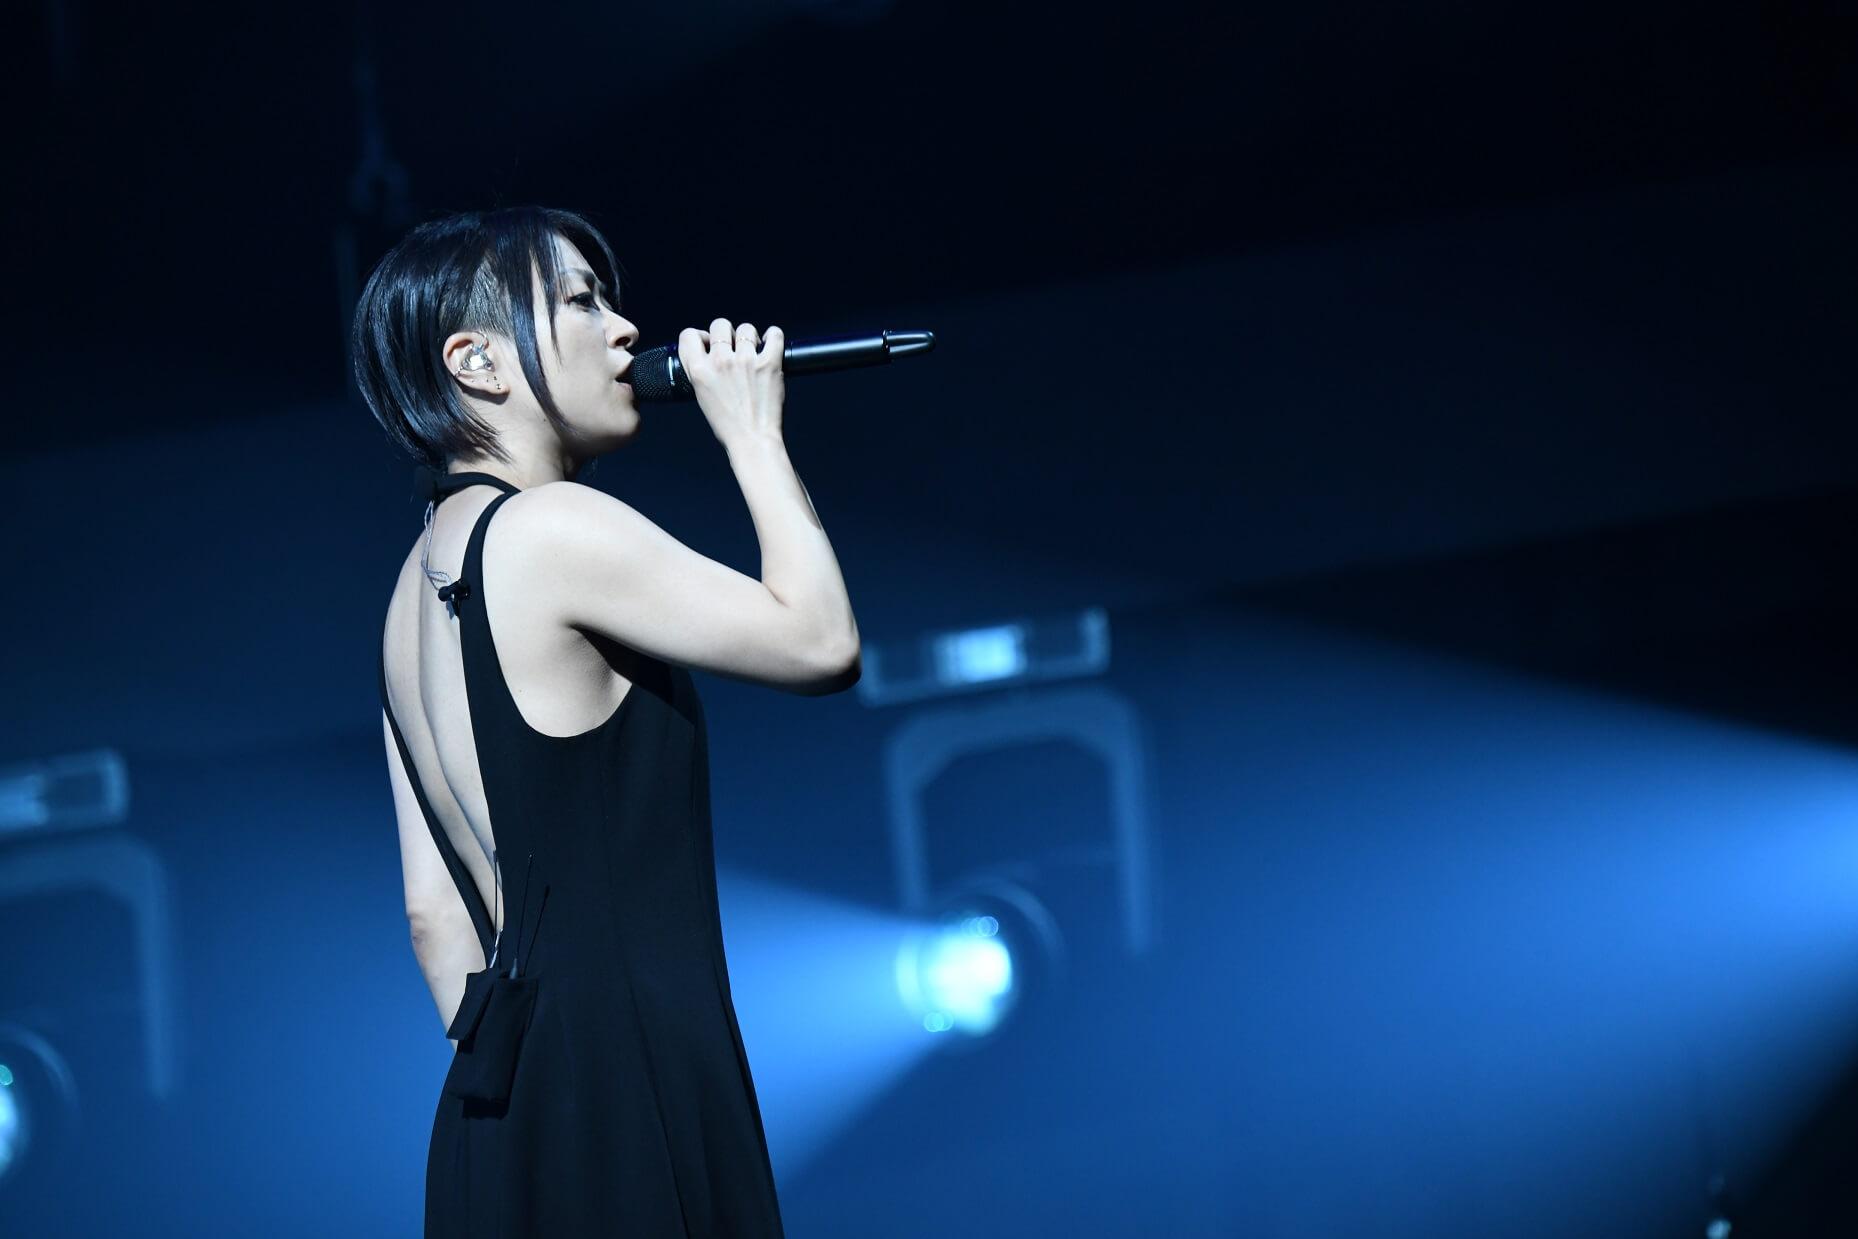 Utada Hikaru Laughter in the Dark 2018 Tour is now available for